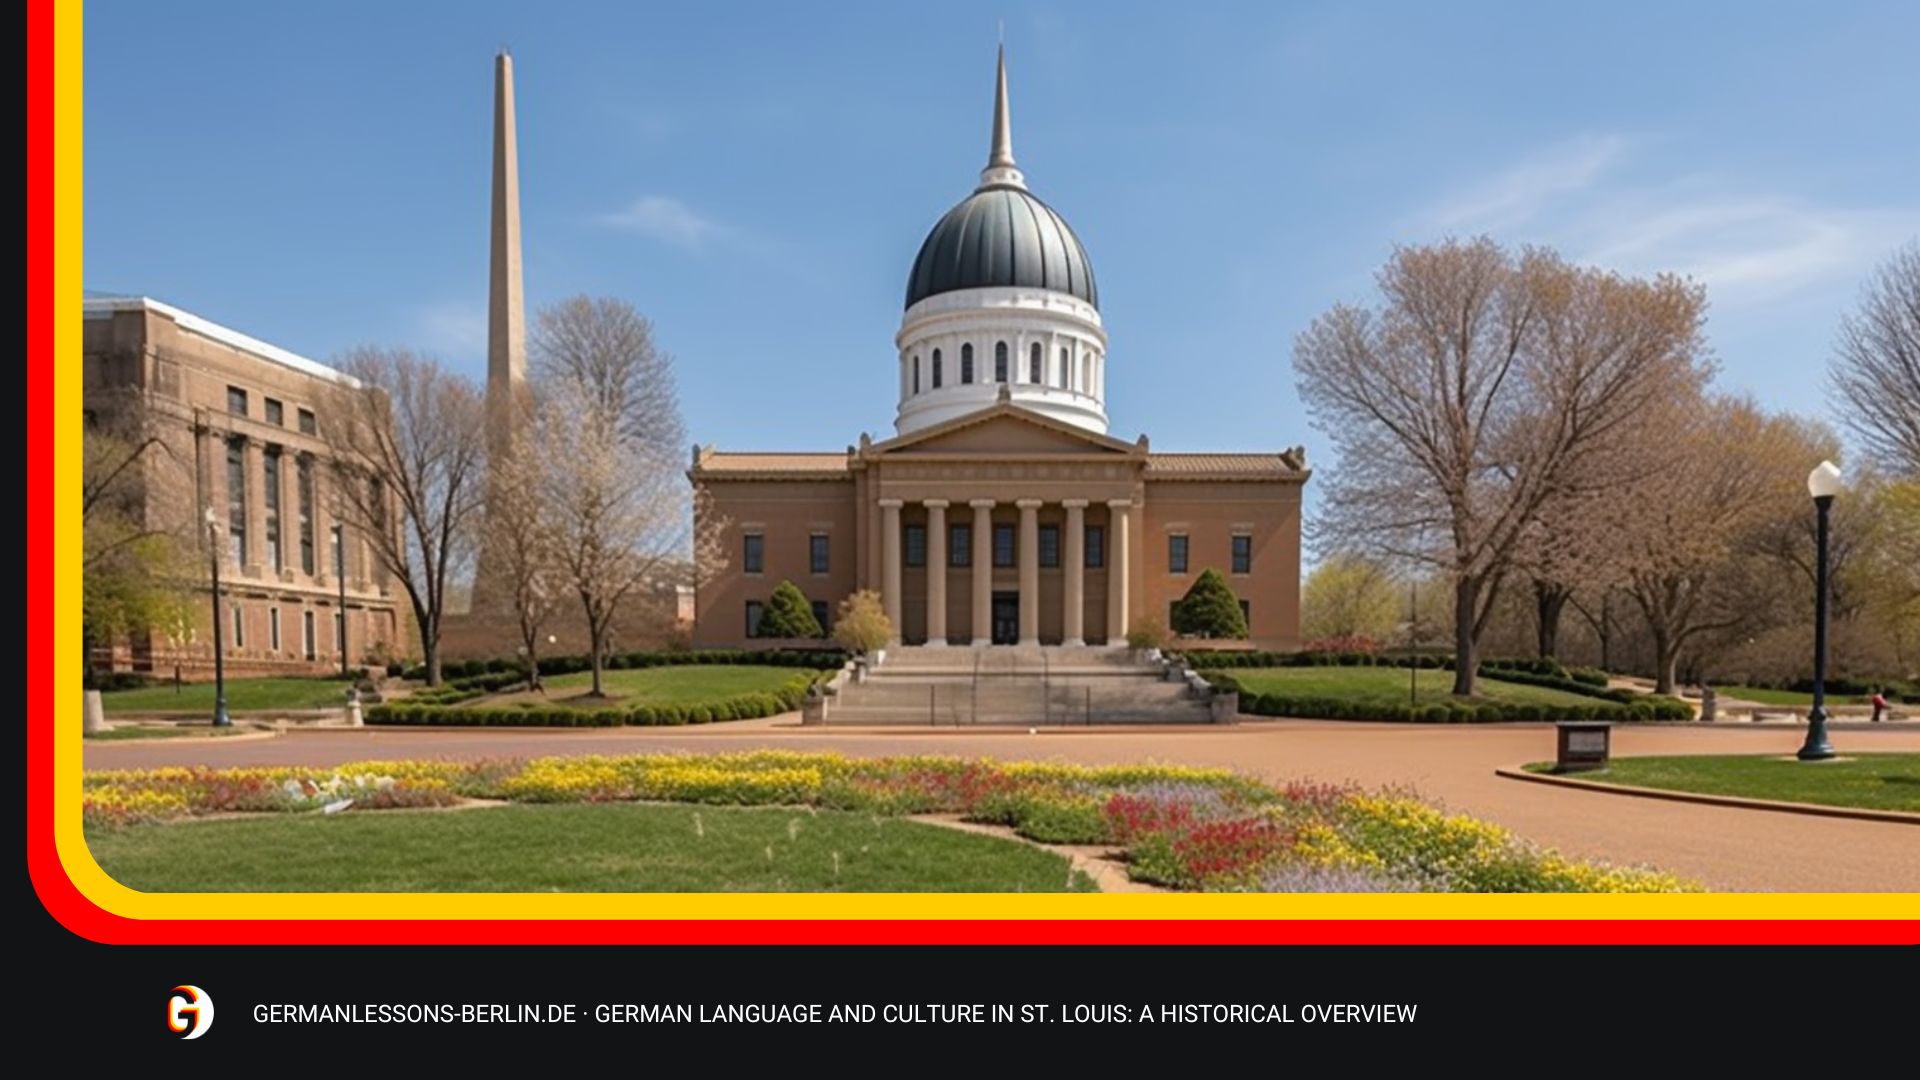 German Language And Culture In St. Louis: A Historical Overview